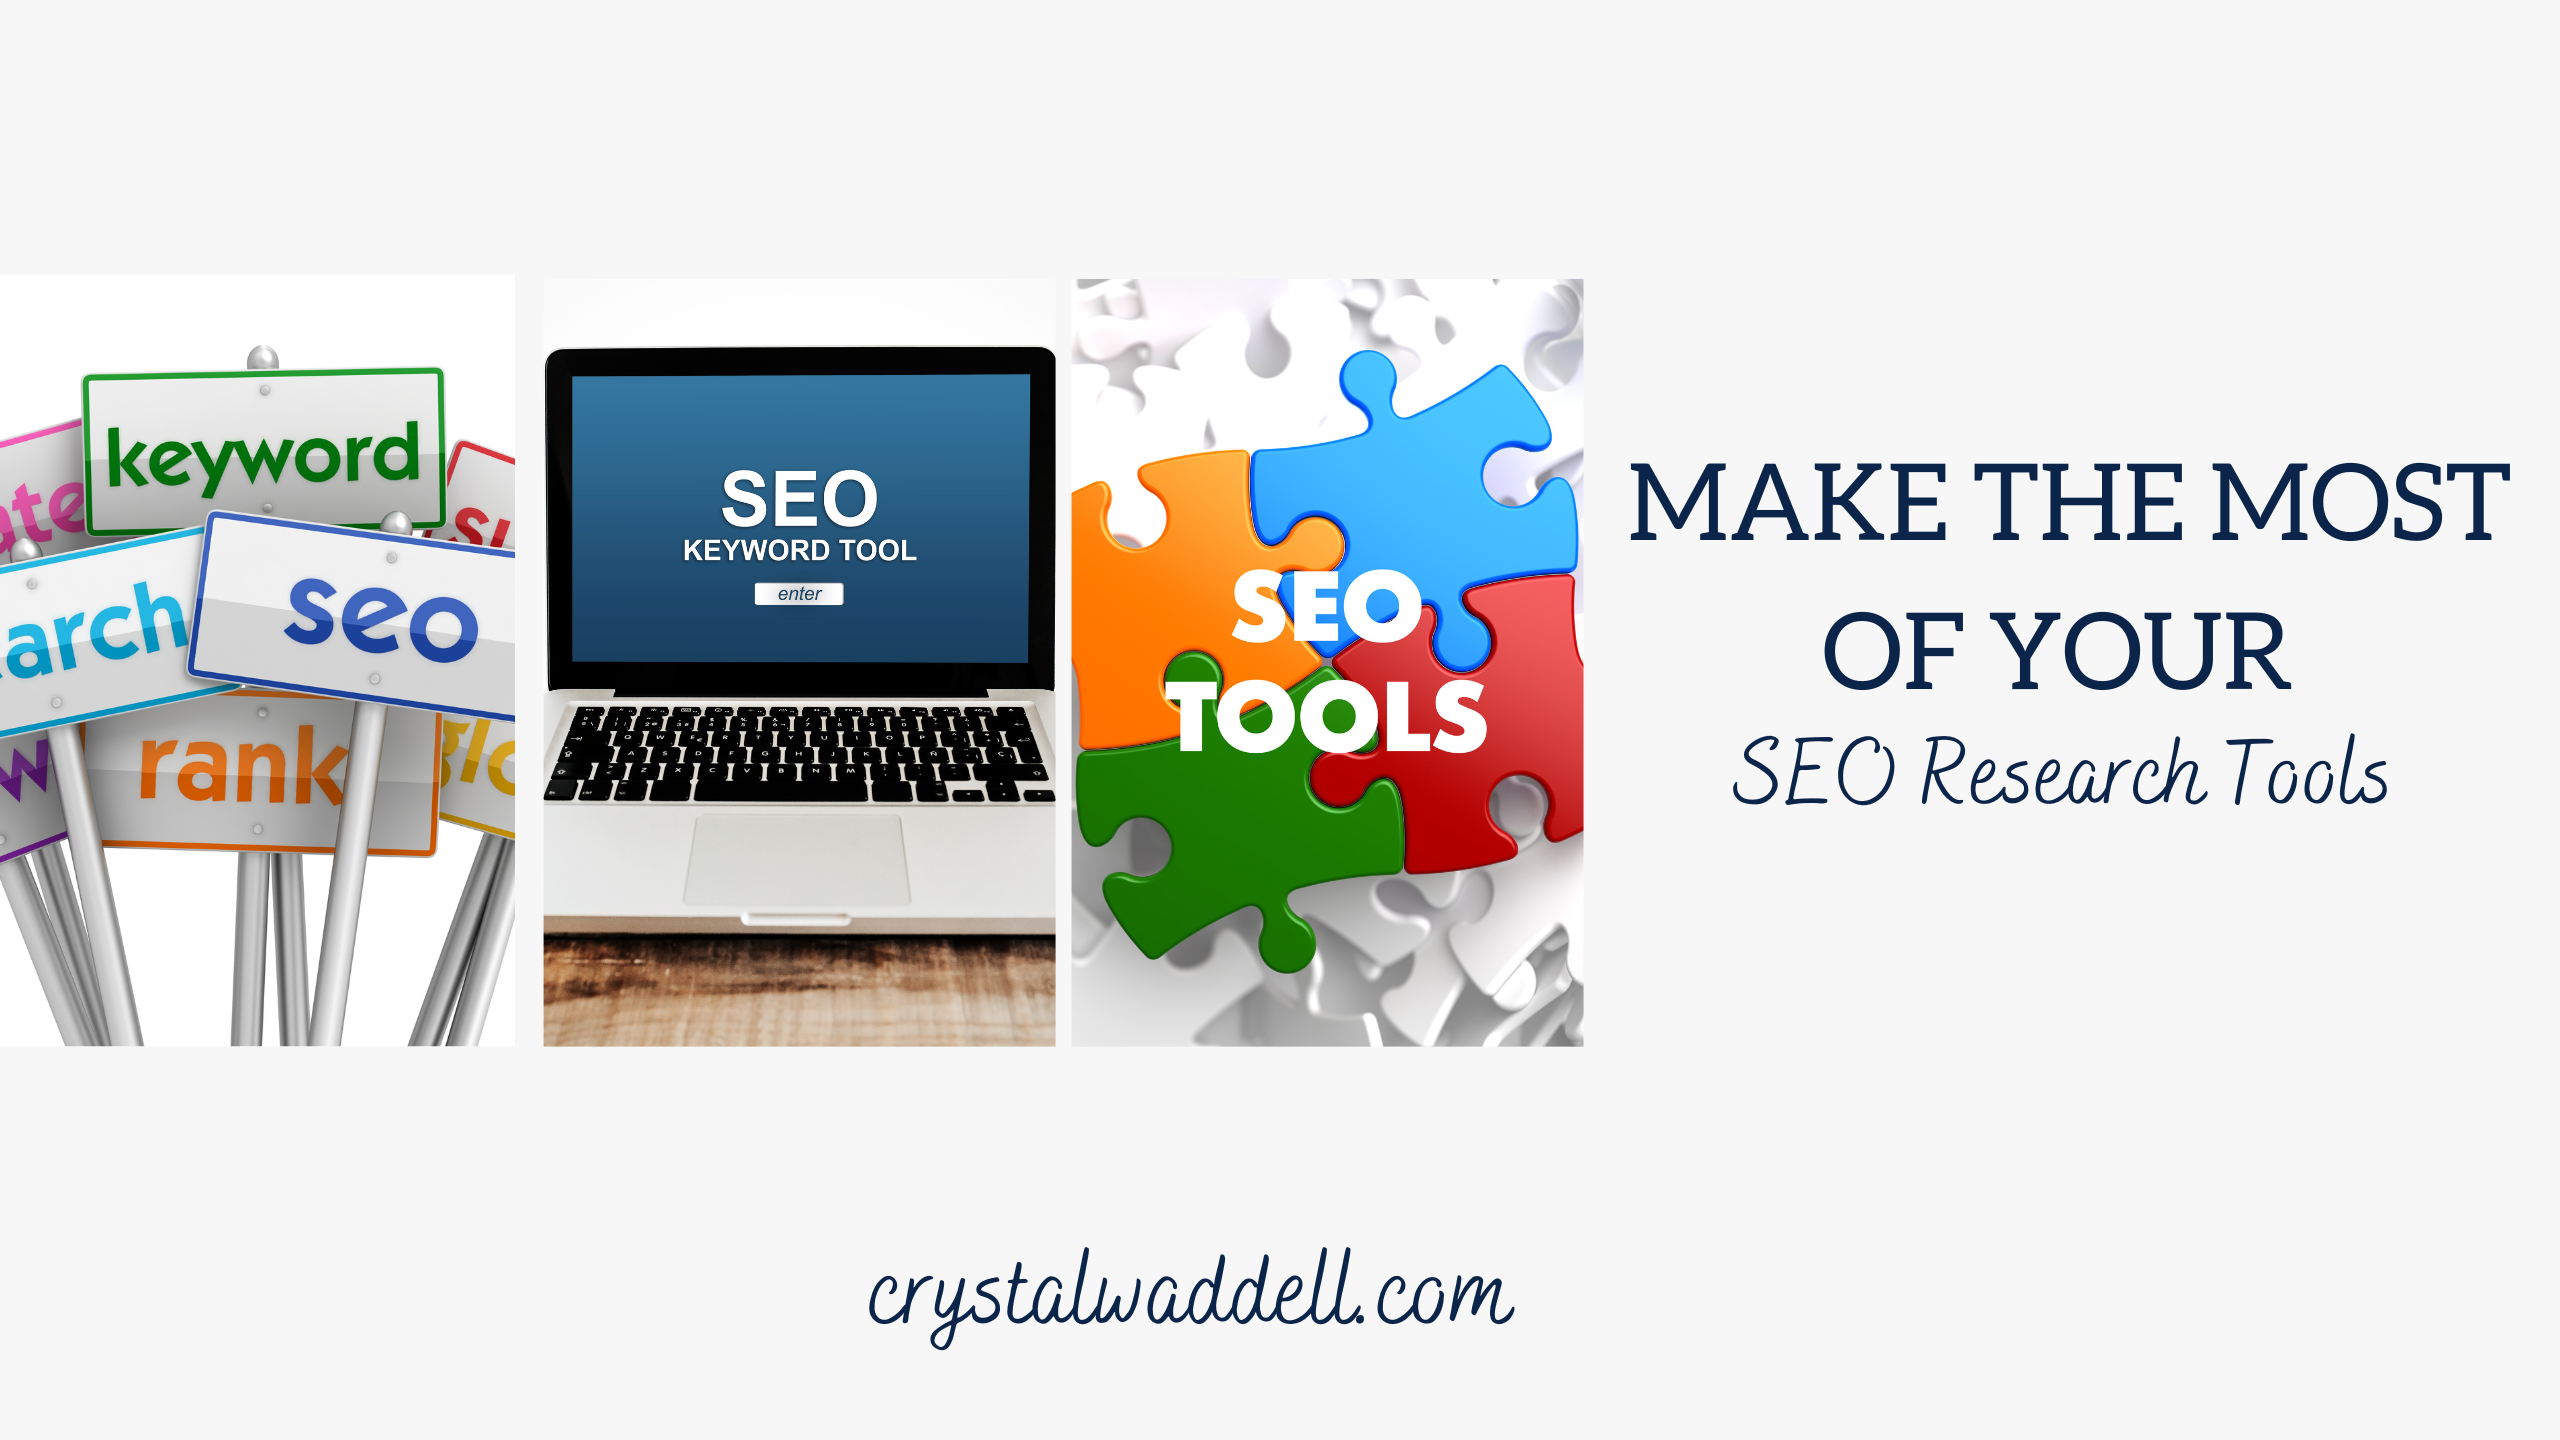 Find the easiest keywords to target to improve your keyword rankings with free SEO research tools.